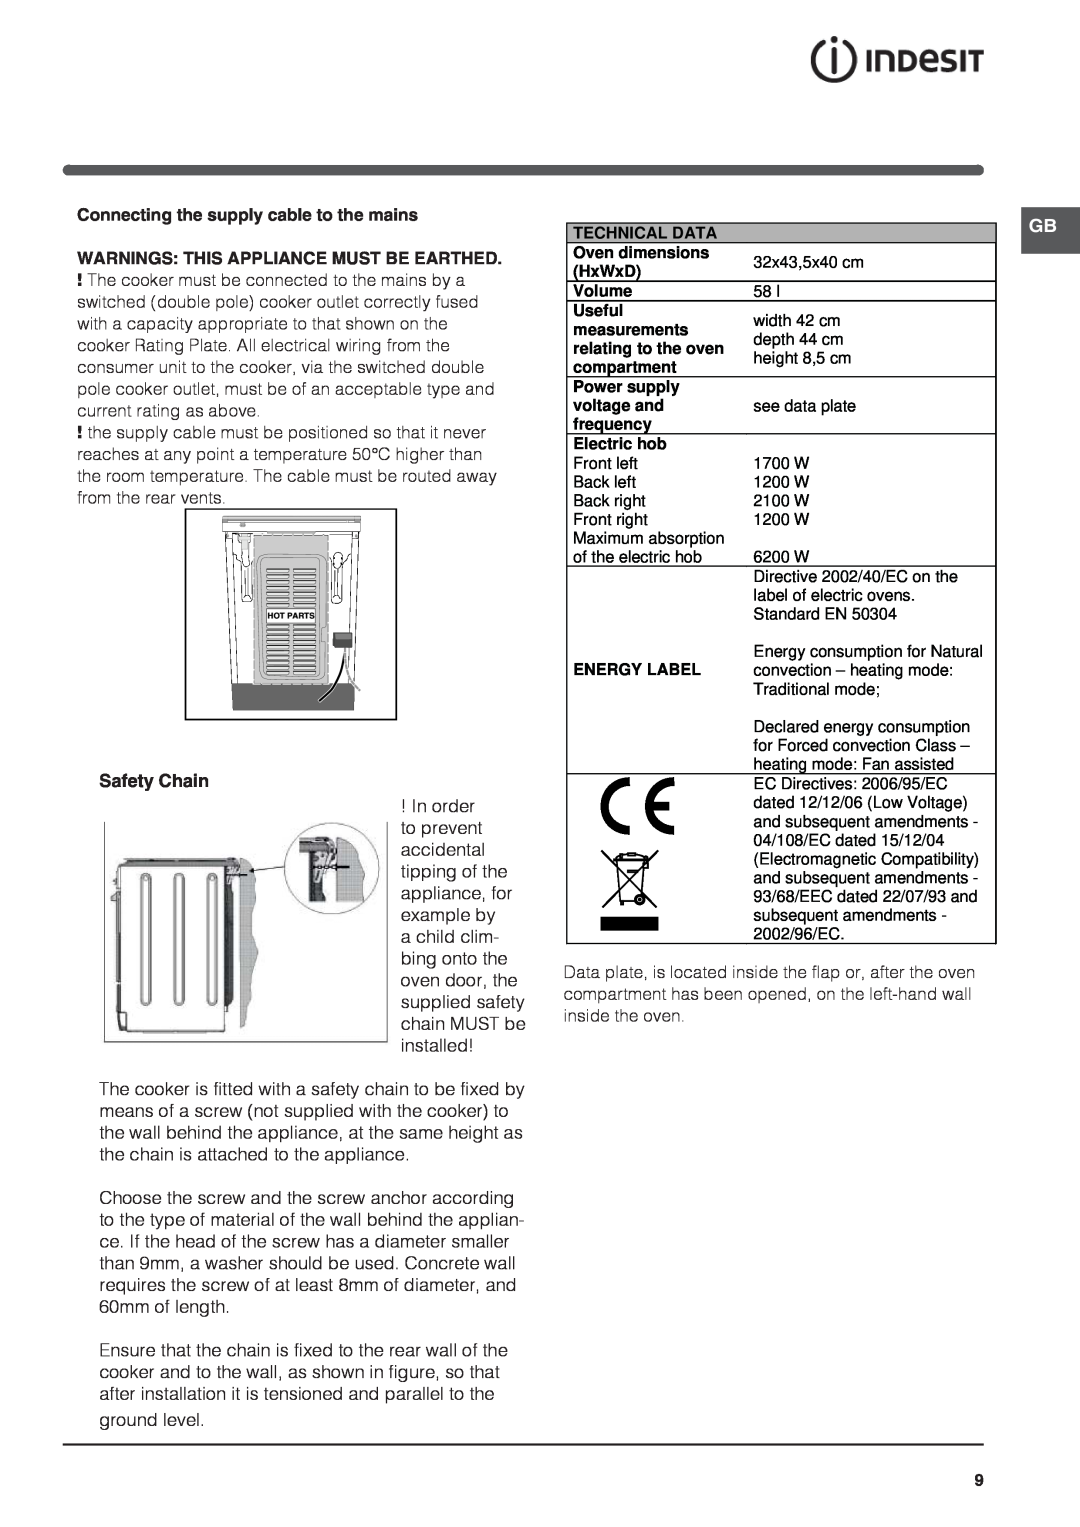 Indesit I6VV2A manual Connecting the supply cable to the mains, Warnings This Appliance Must Be Earthed, Safety Chain 